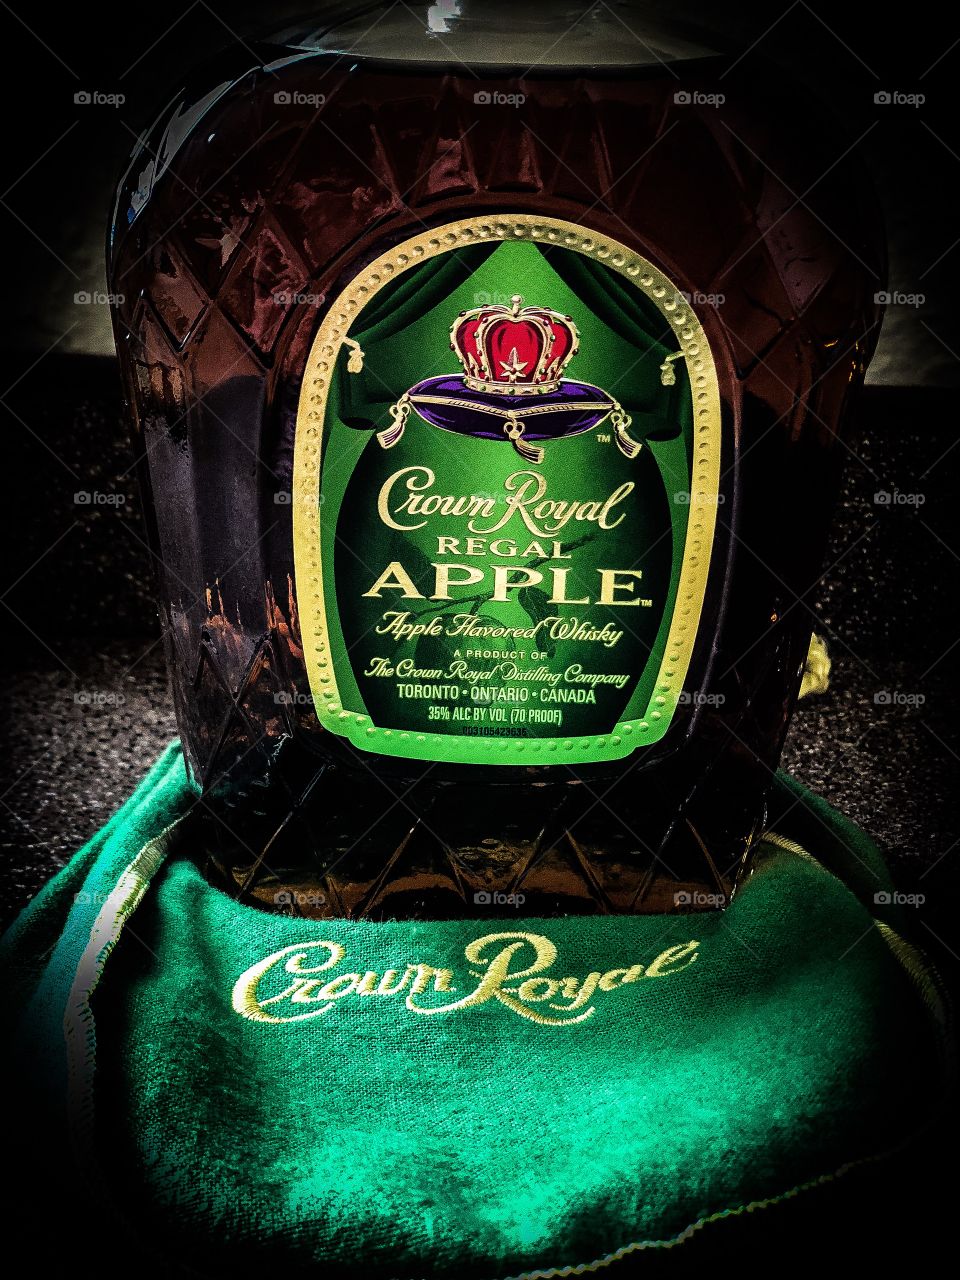 Out of all the liquors in this world, make sure that you try crown royal because it never will disappoint 💋